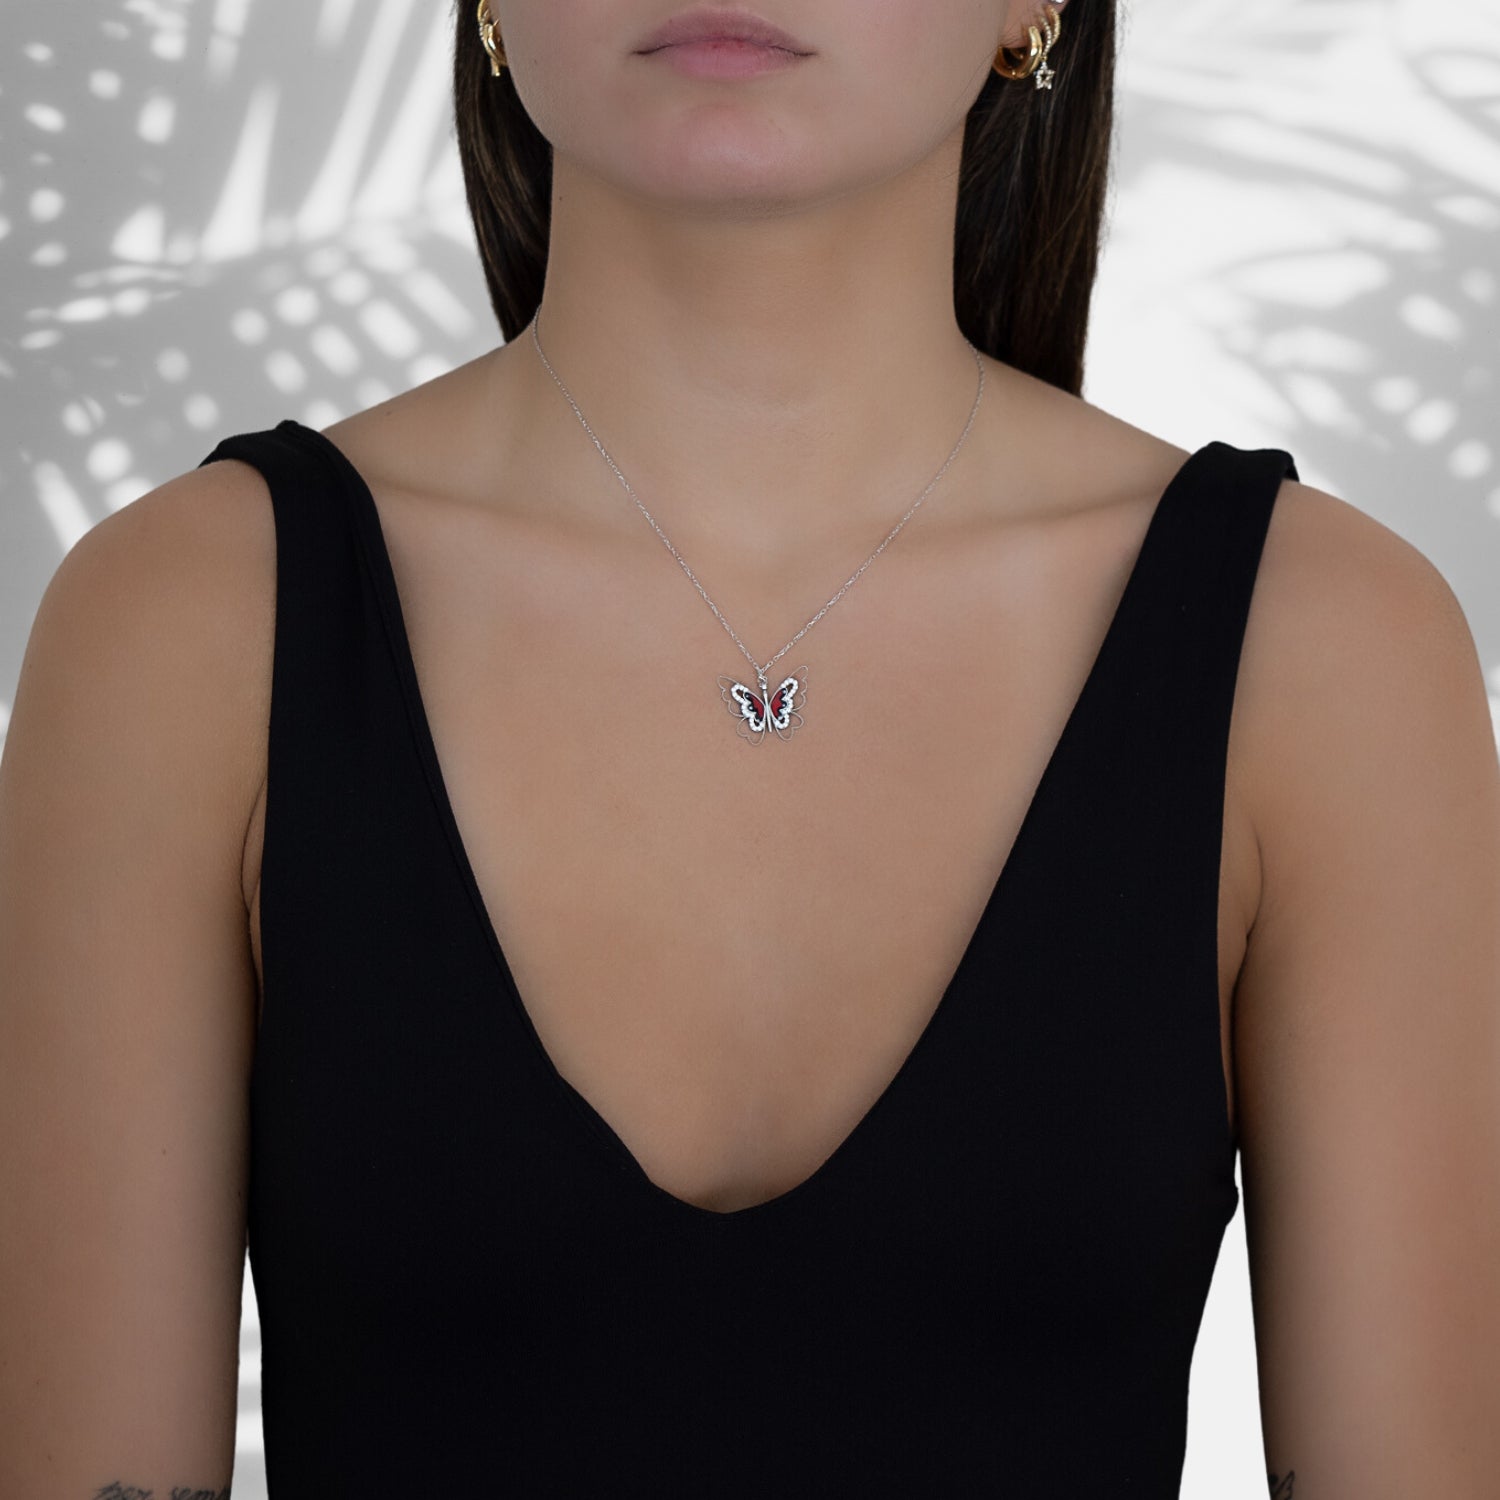 The Sterling Silver Peace Red Butterfly Necklace complementing the model&#39;s attire with grace and style.